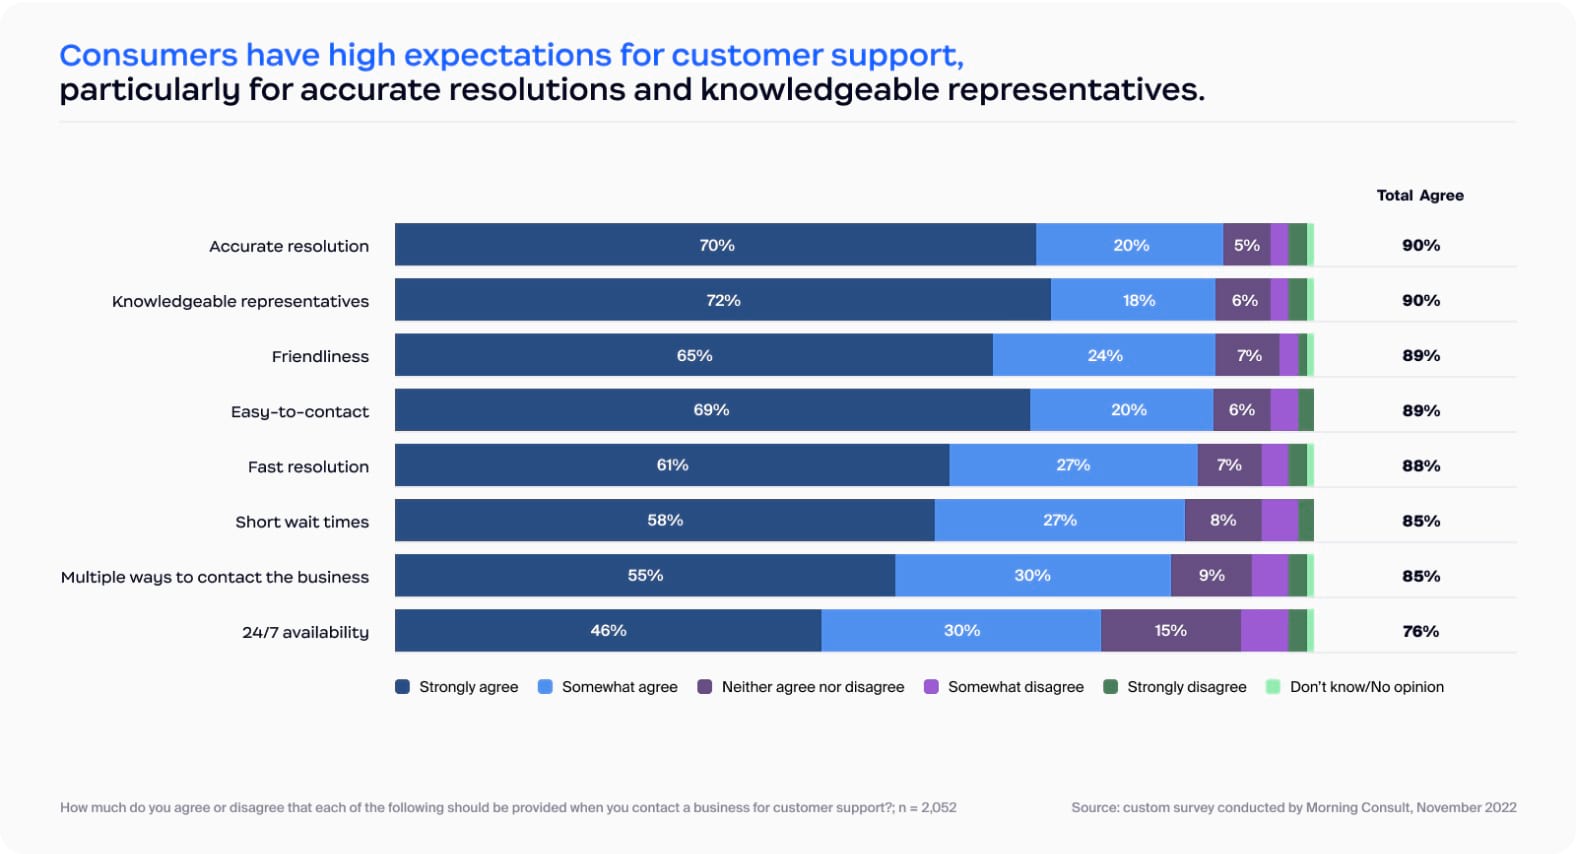 Consumers have high expectations for customer support